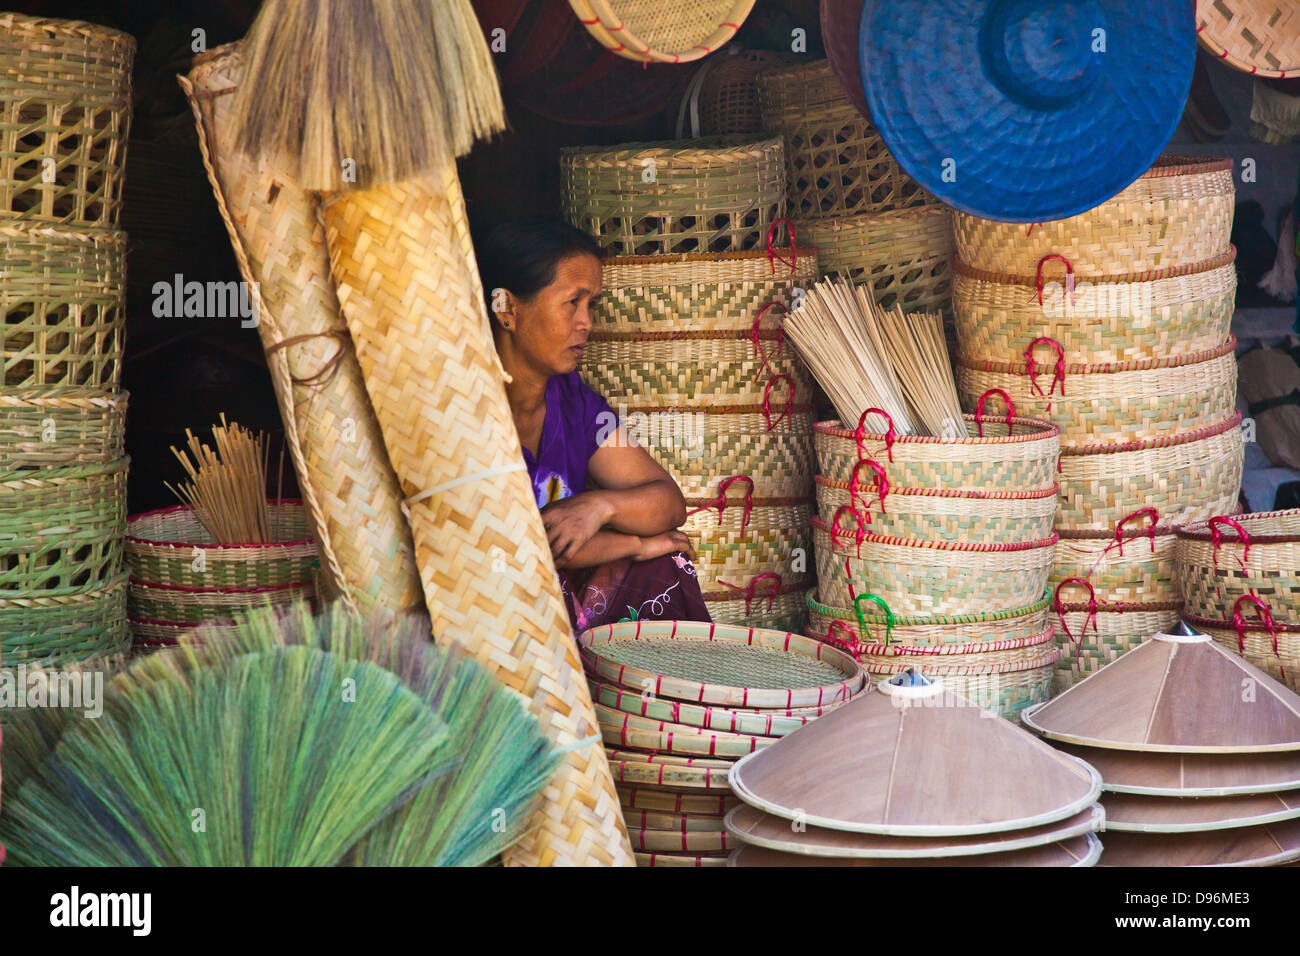 BAMBOO BROOMS, HATS and BASKETS are sold at the CENTRAL MARKET in KENGTUNG also known as KYAINGTONG - MYANMAR Stock Photo